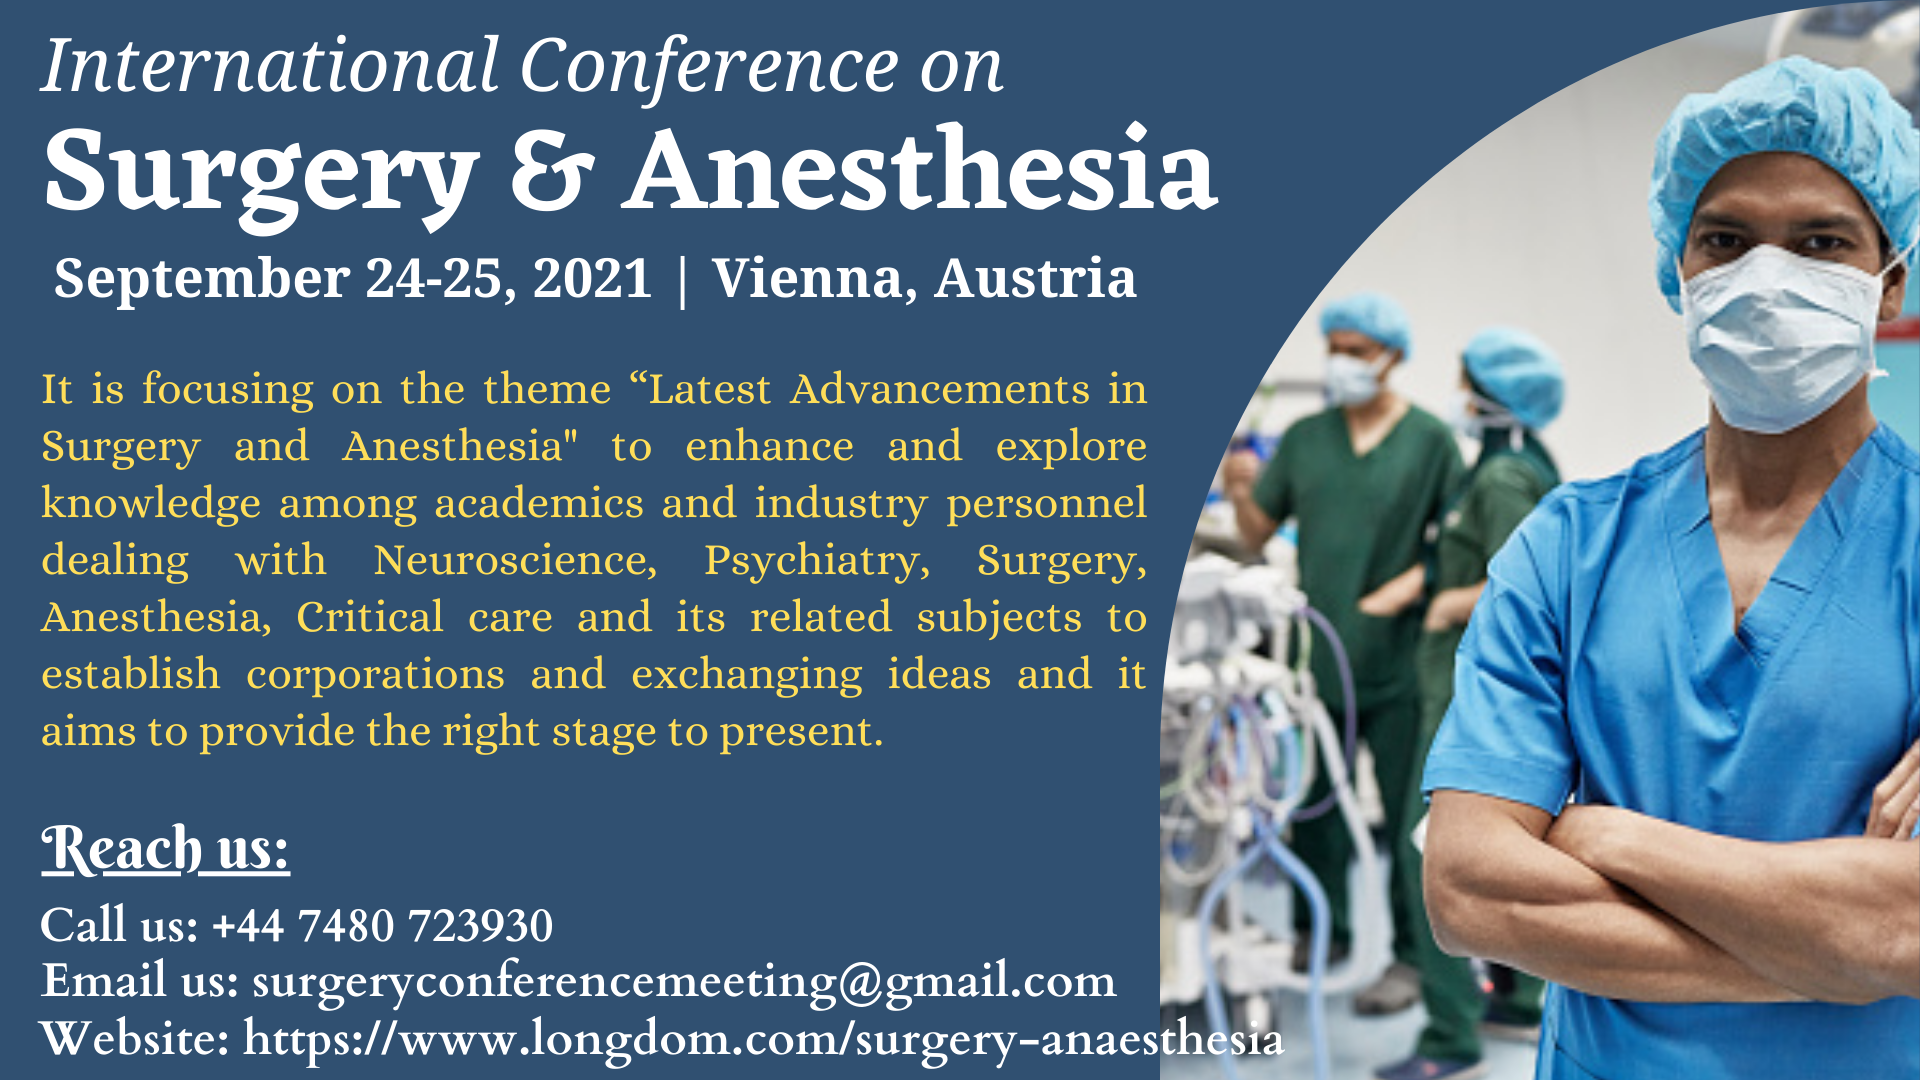 International Conference on Surgery and Anesthesia, Wien, Austria